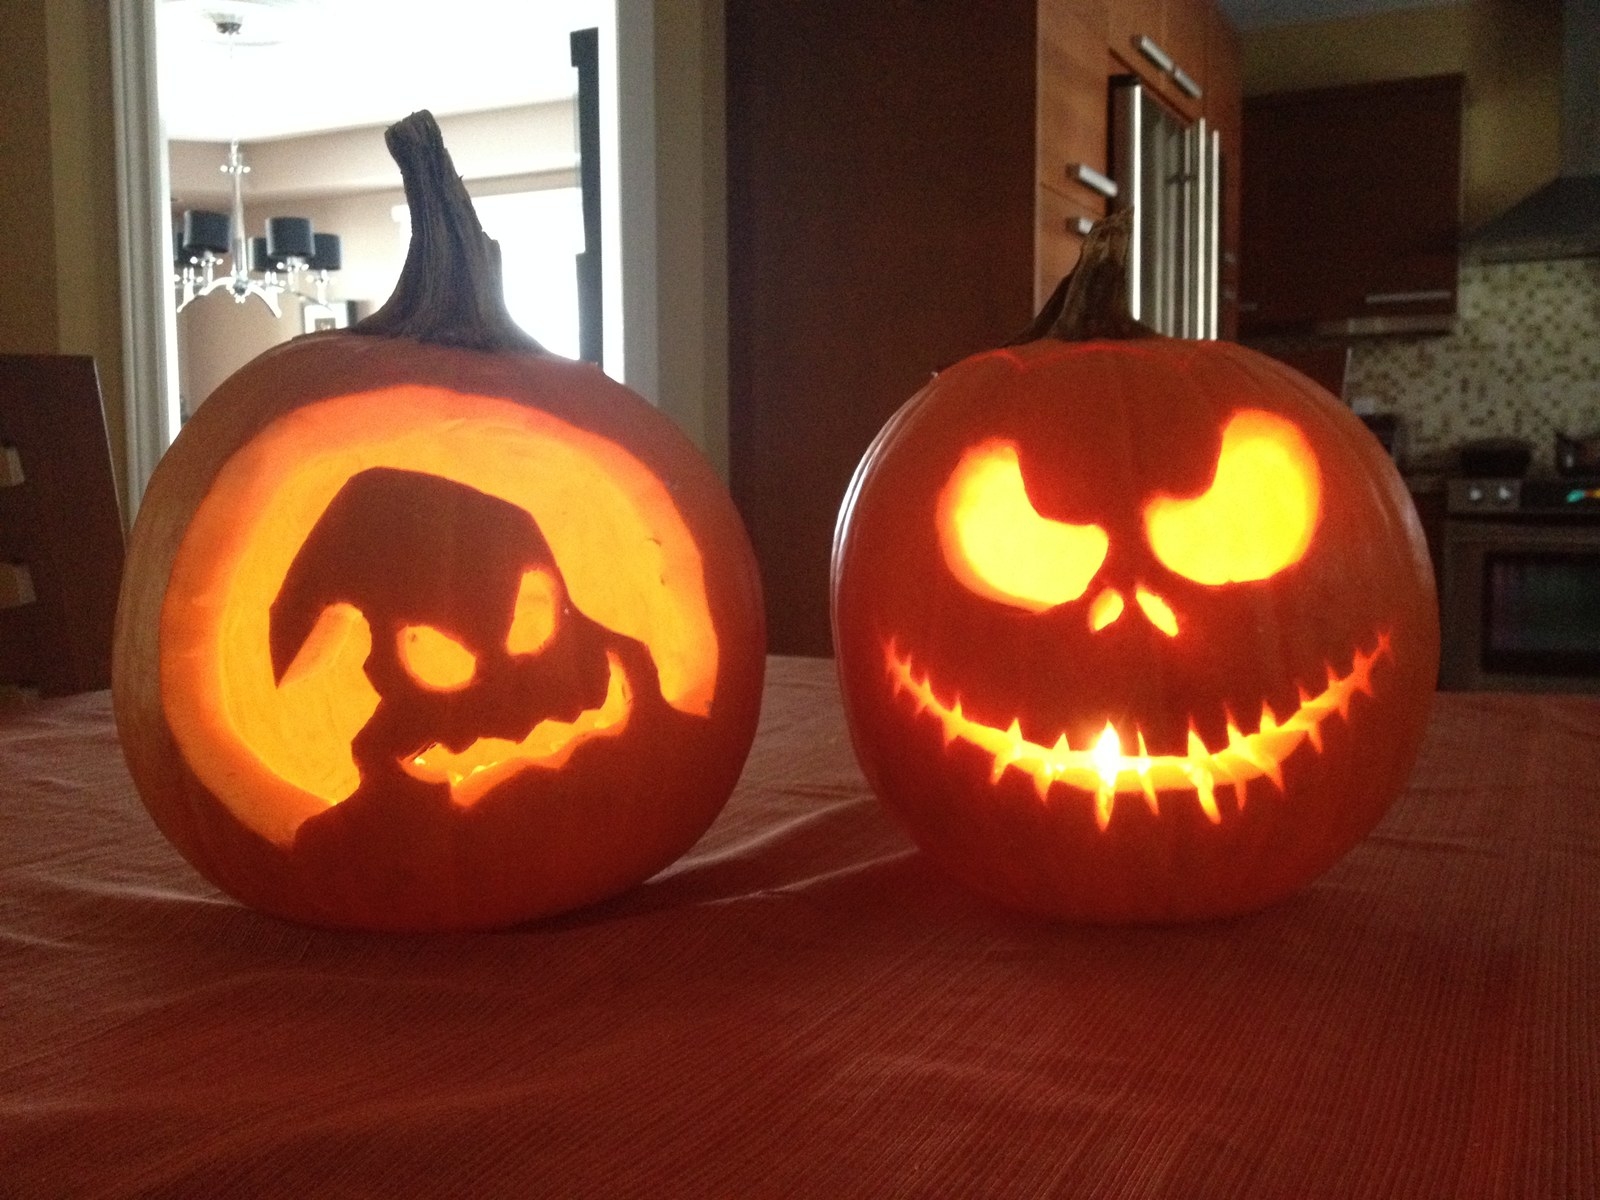 Show Us Your Amazing And Creative Pumpkin Carvings